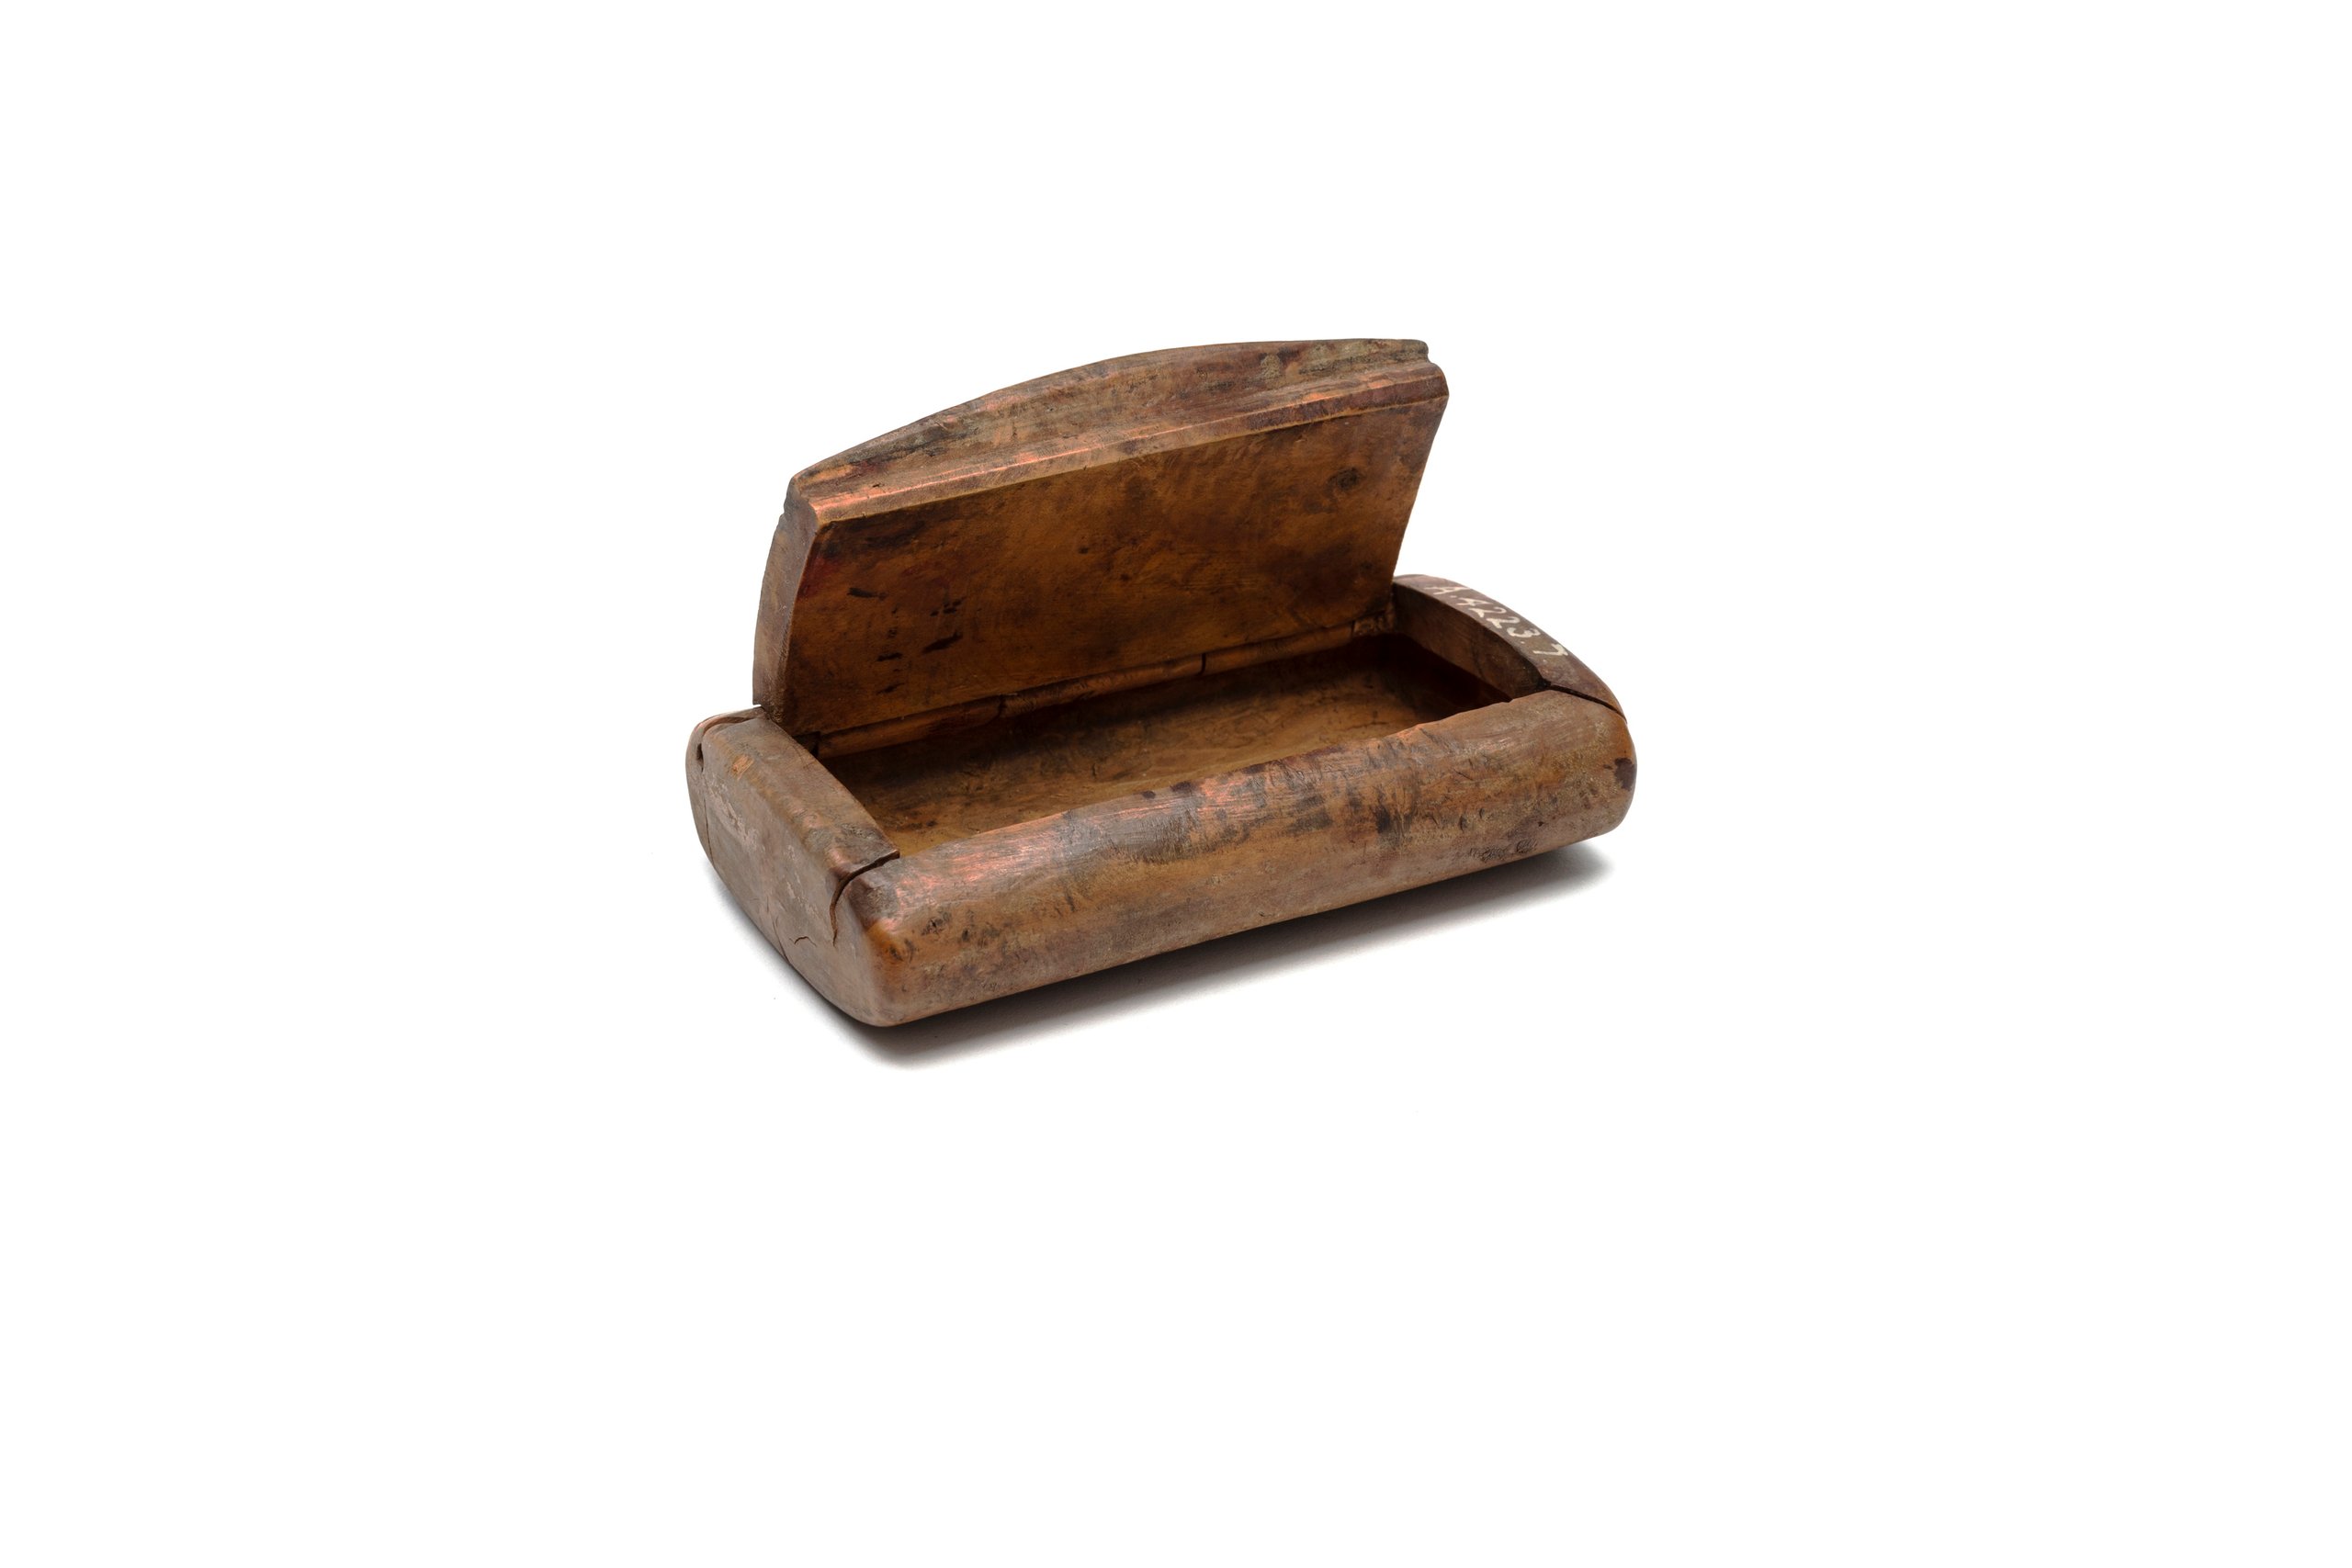 Small wooden box with hinged lid